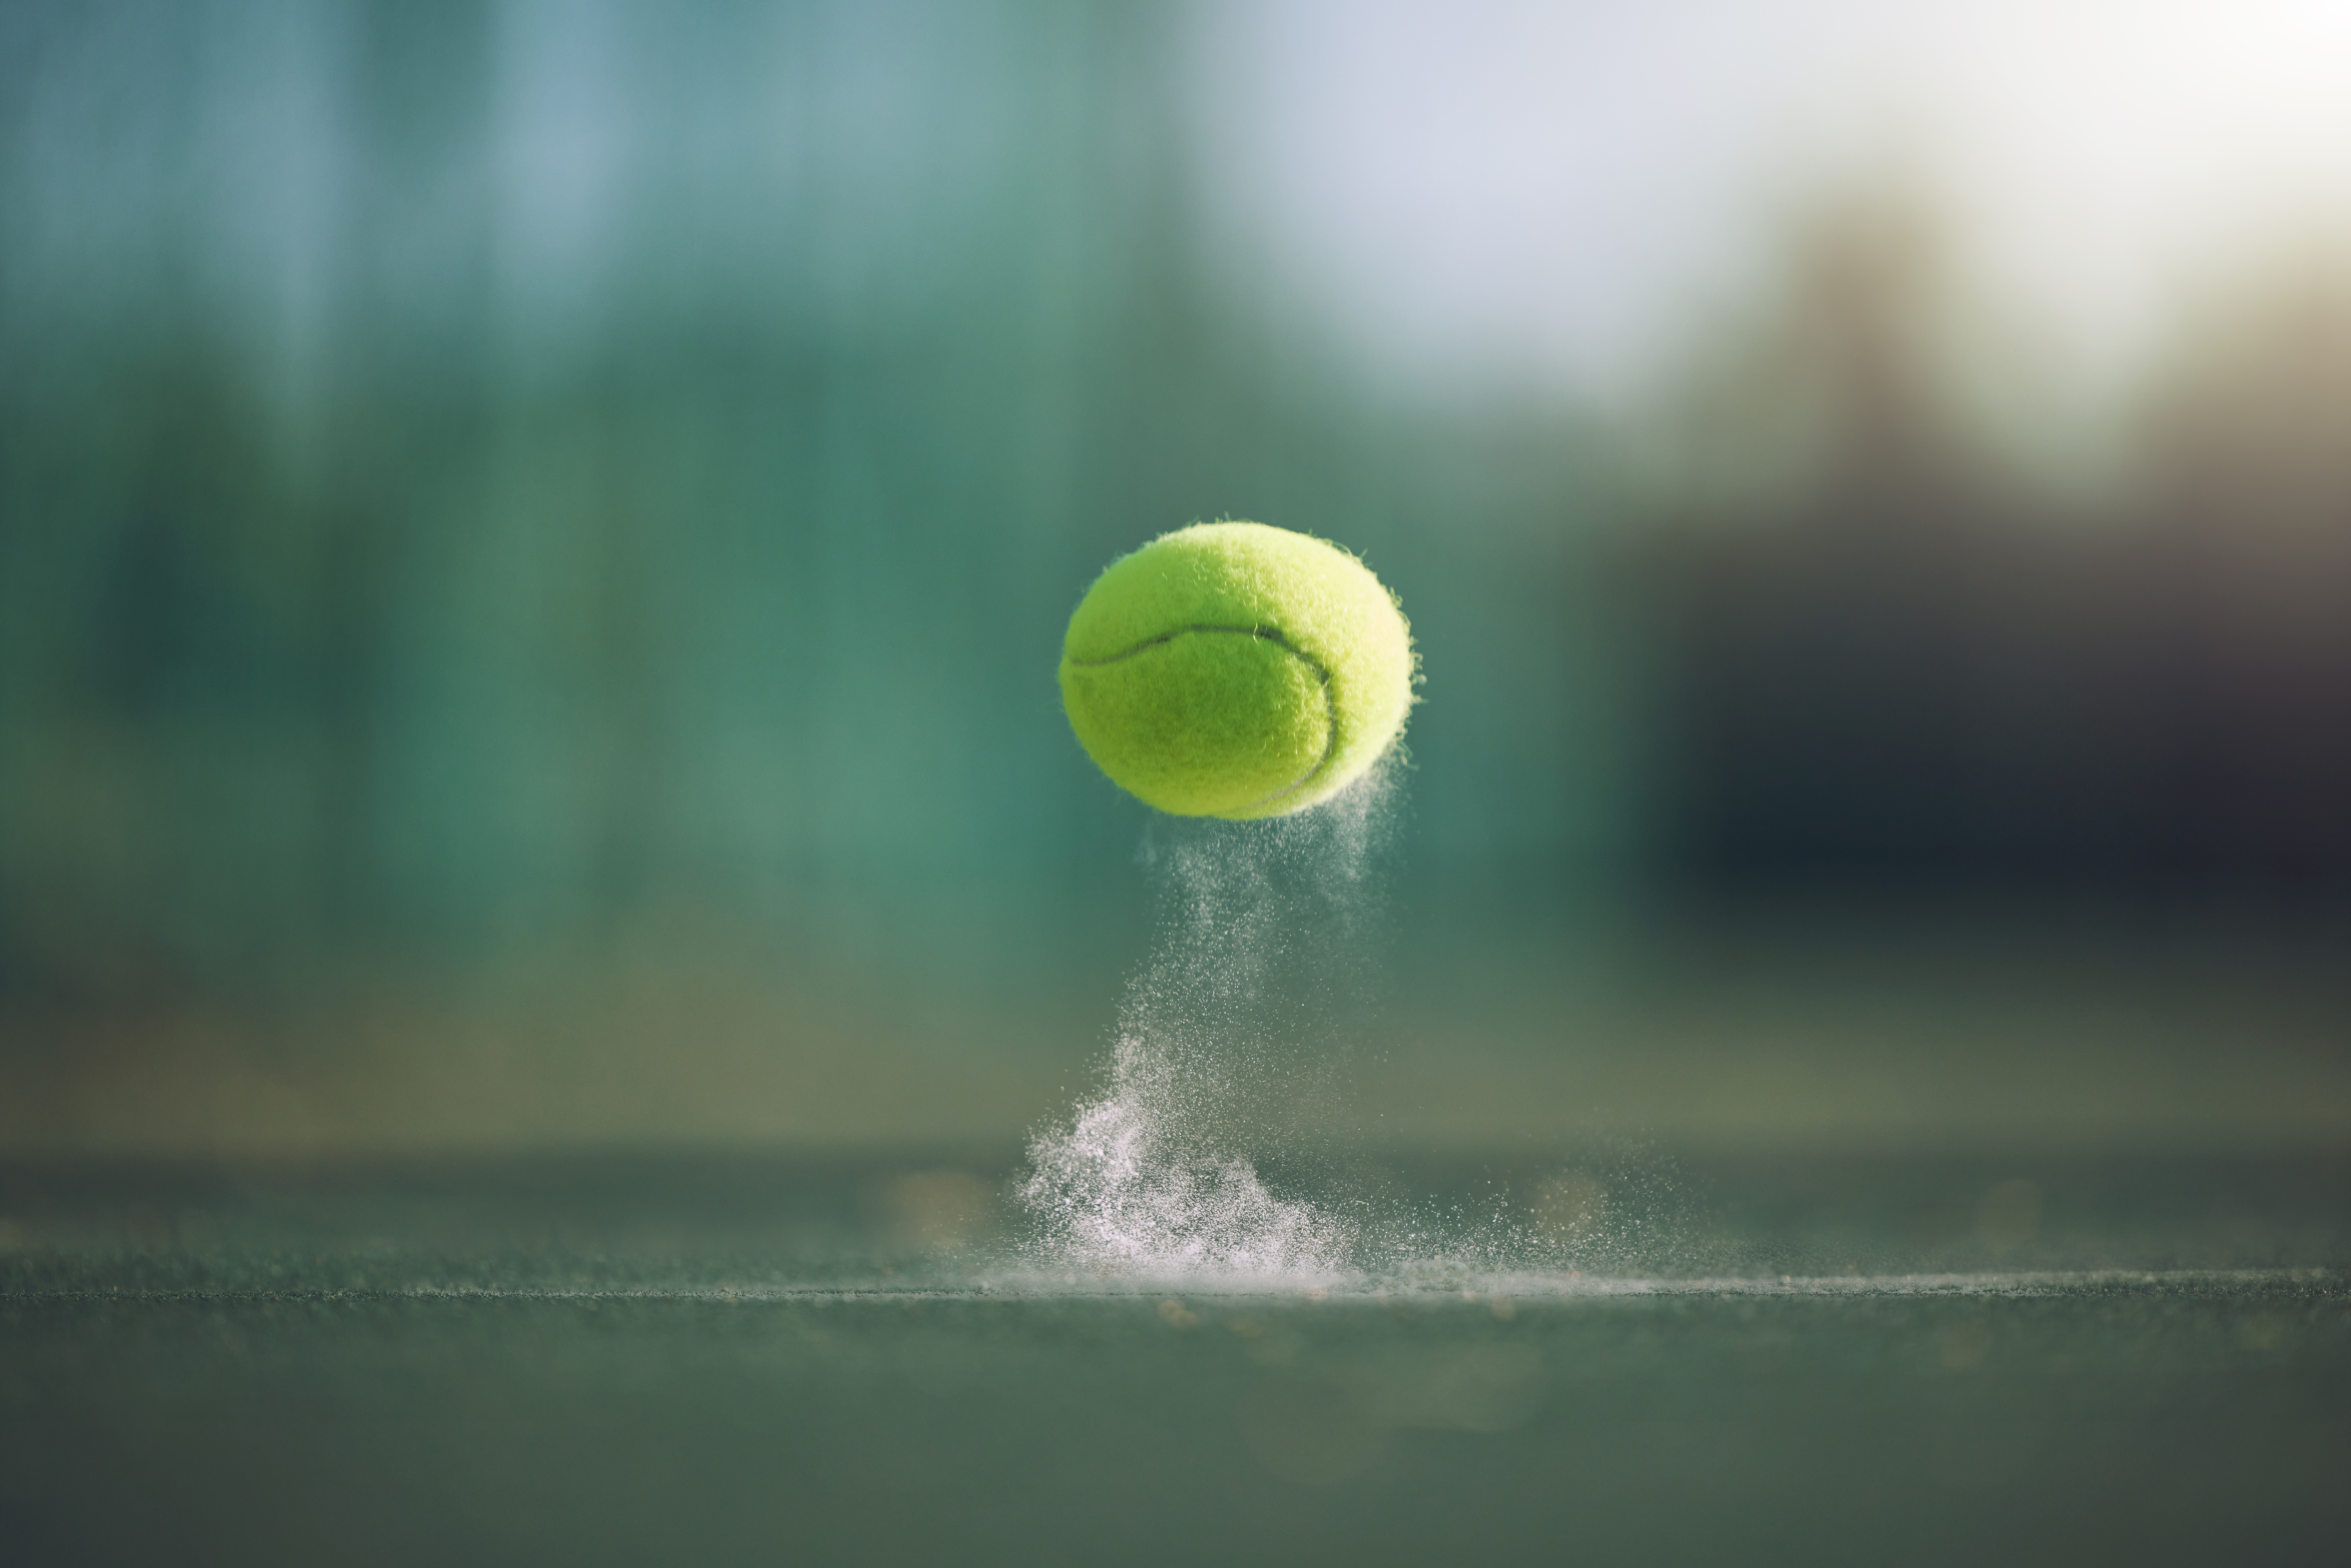 What Is the Point of Running With a Tennis Ball - InsideHook